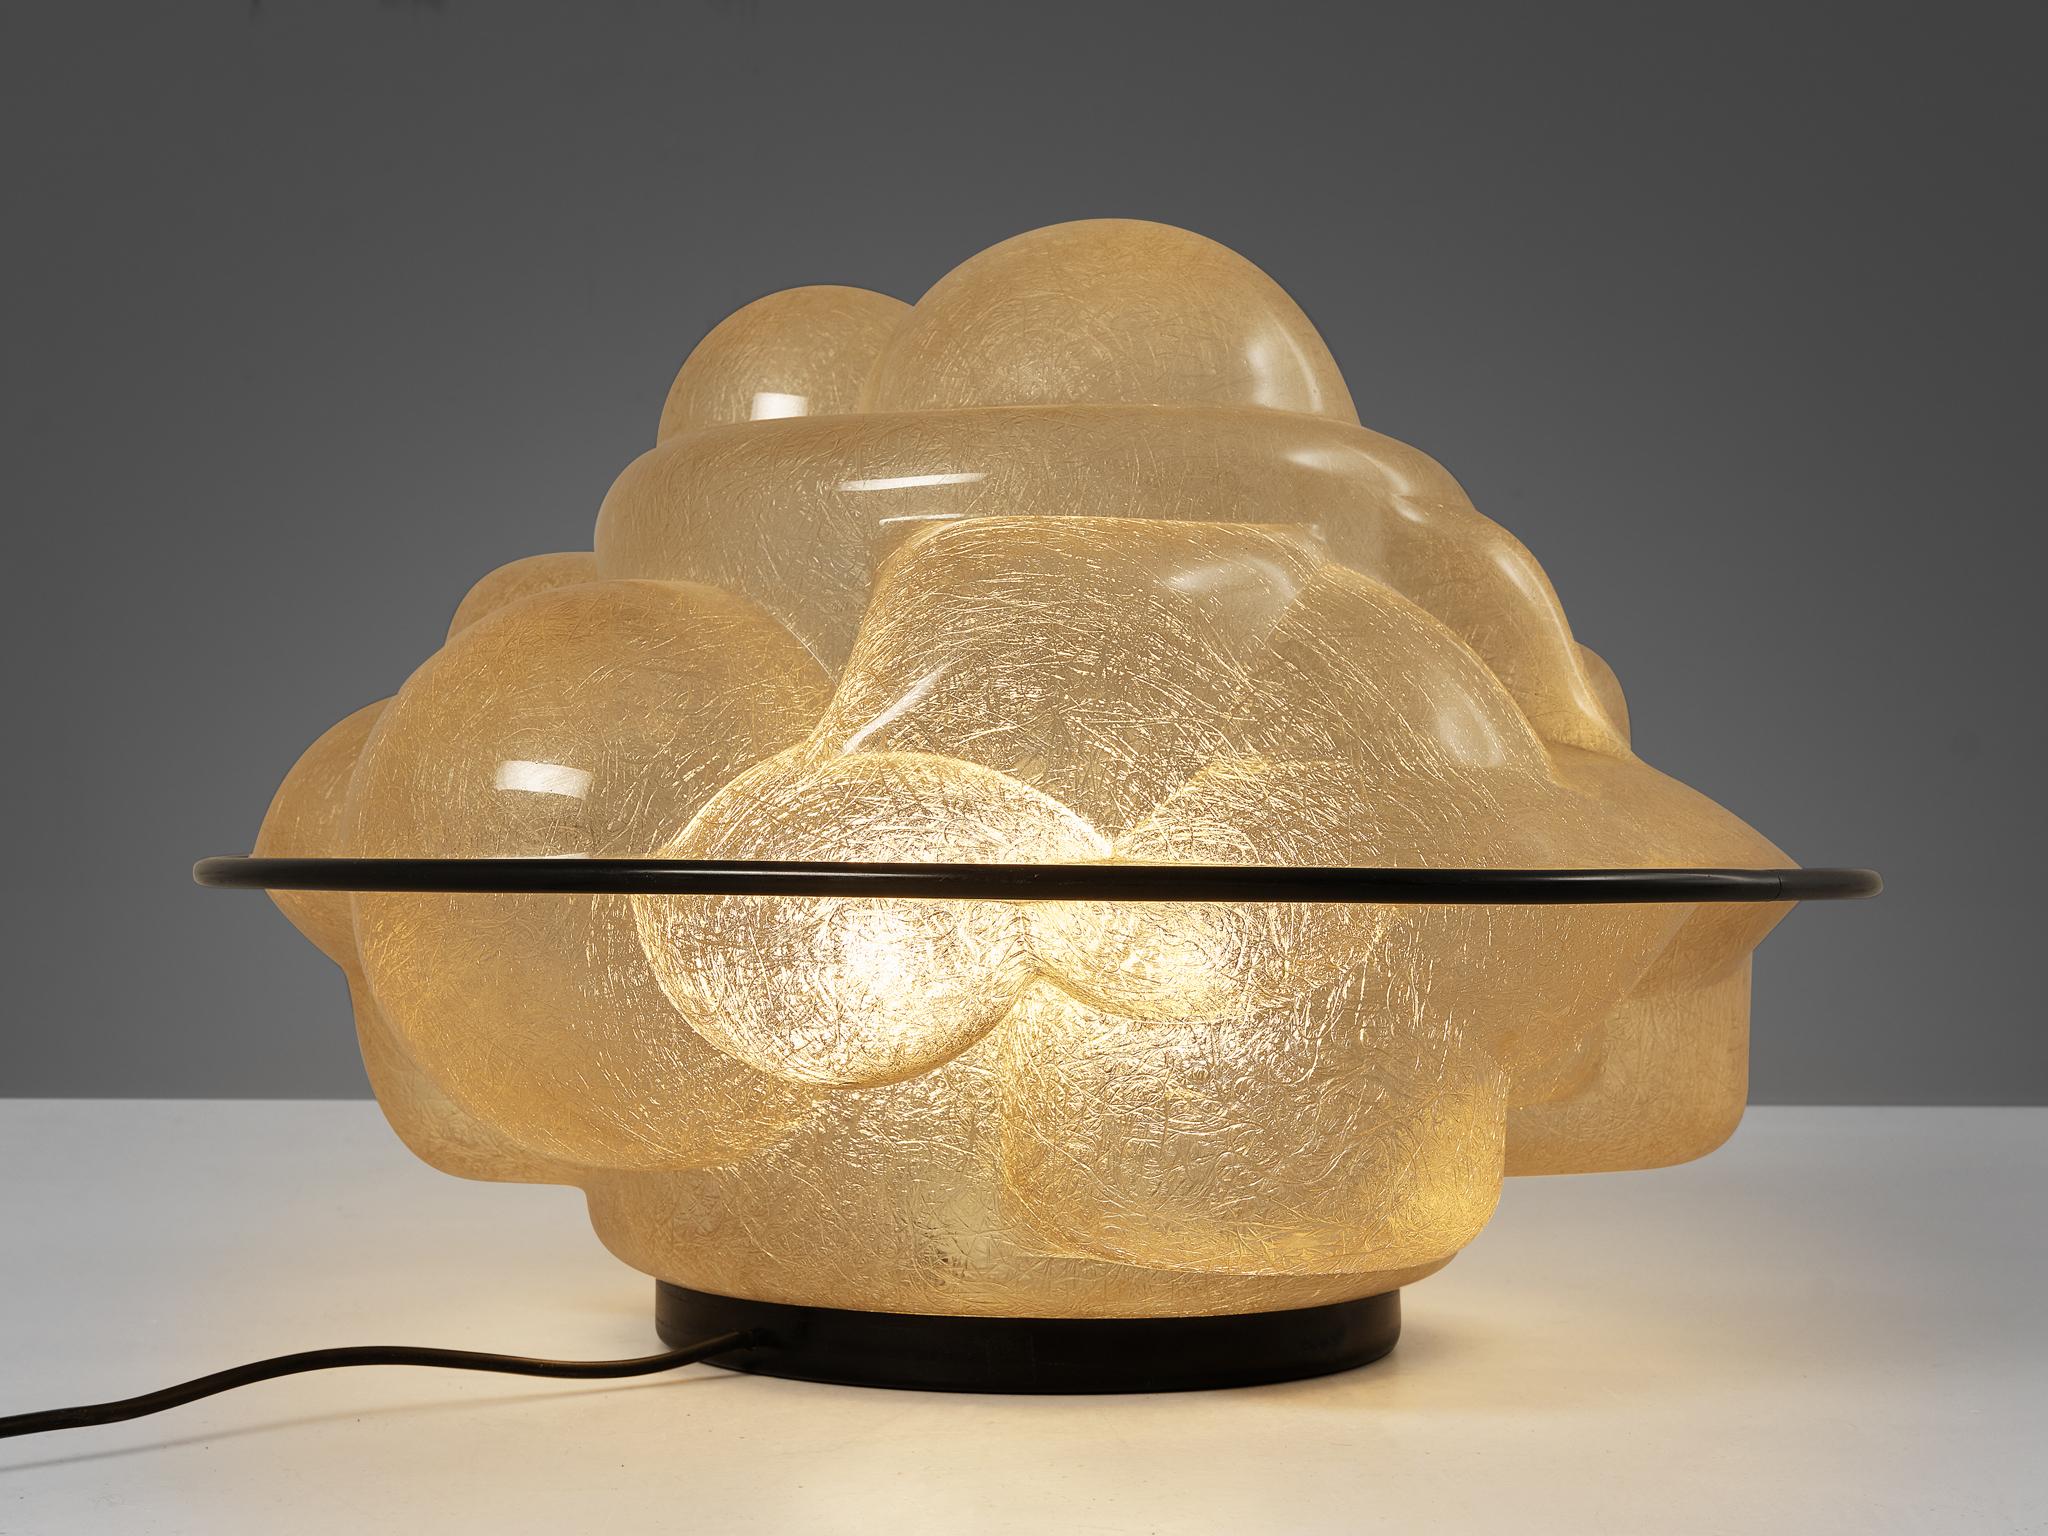 Sergio Asti for Martinelli Luce, ‘Profiterole’, floor or table lamp, model ‘640’, fiberglass, plastic, Lucca, Italy, early edition, 1968

A captivating fusion of both functionality and artistic expression, the Profiterole lamp, crafted by the